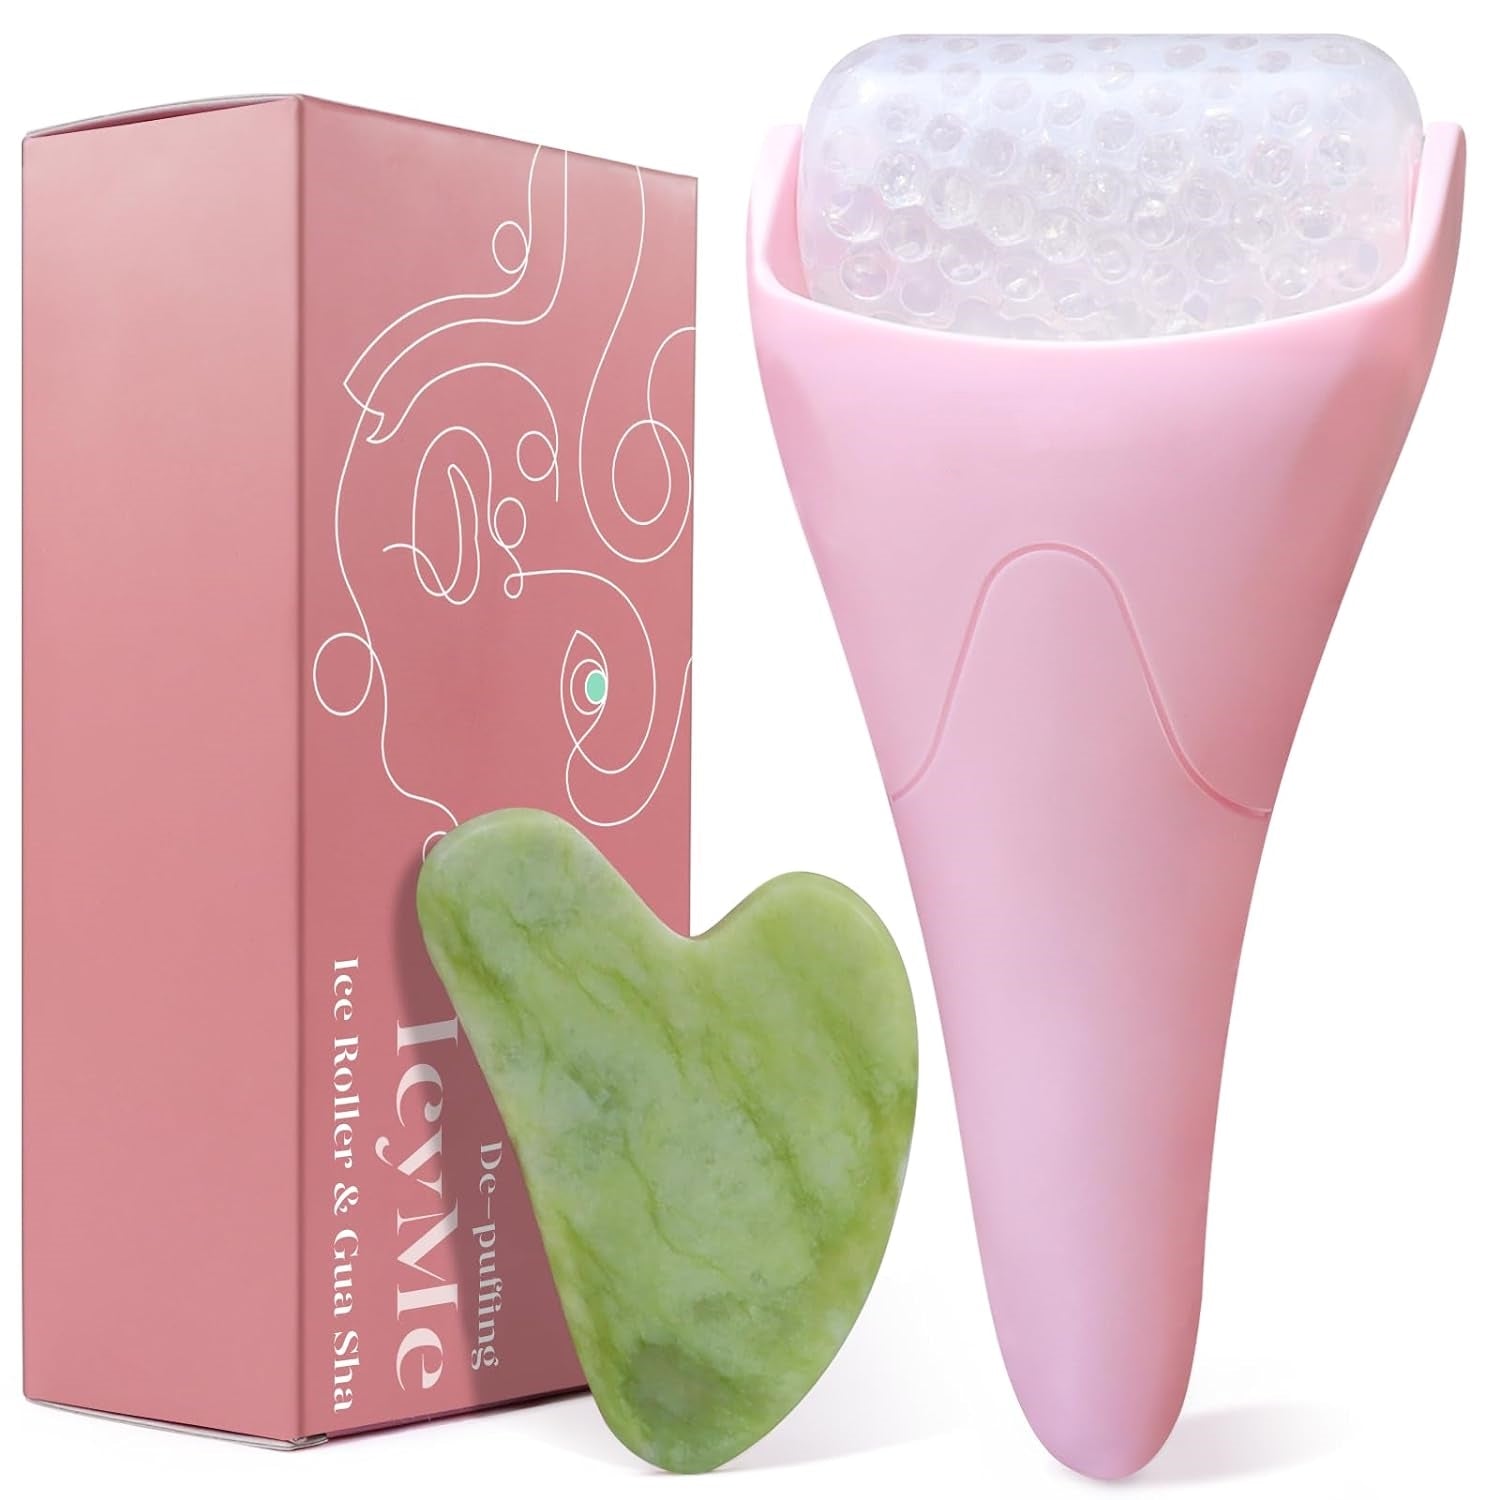 BEAKEY Ice Roller for Face with Gua Sha, Cryotherapy Face Roller Set Facial Skin Care Massager, Pink - BEAKEY